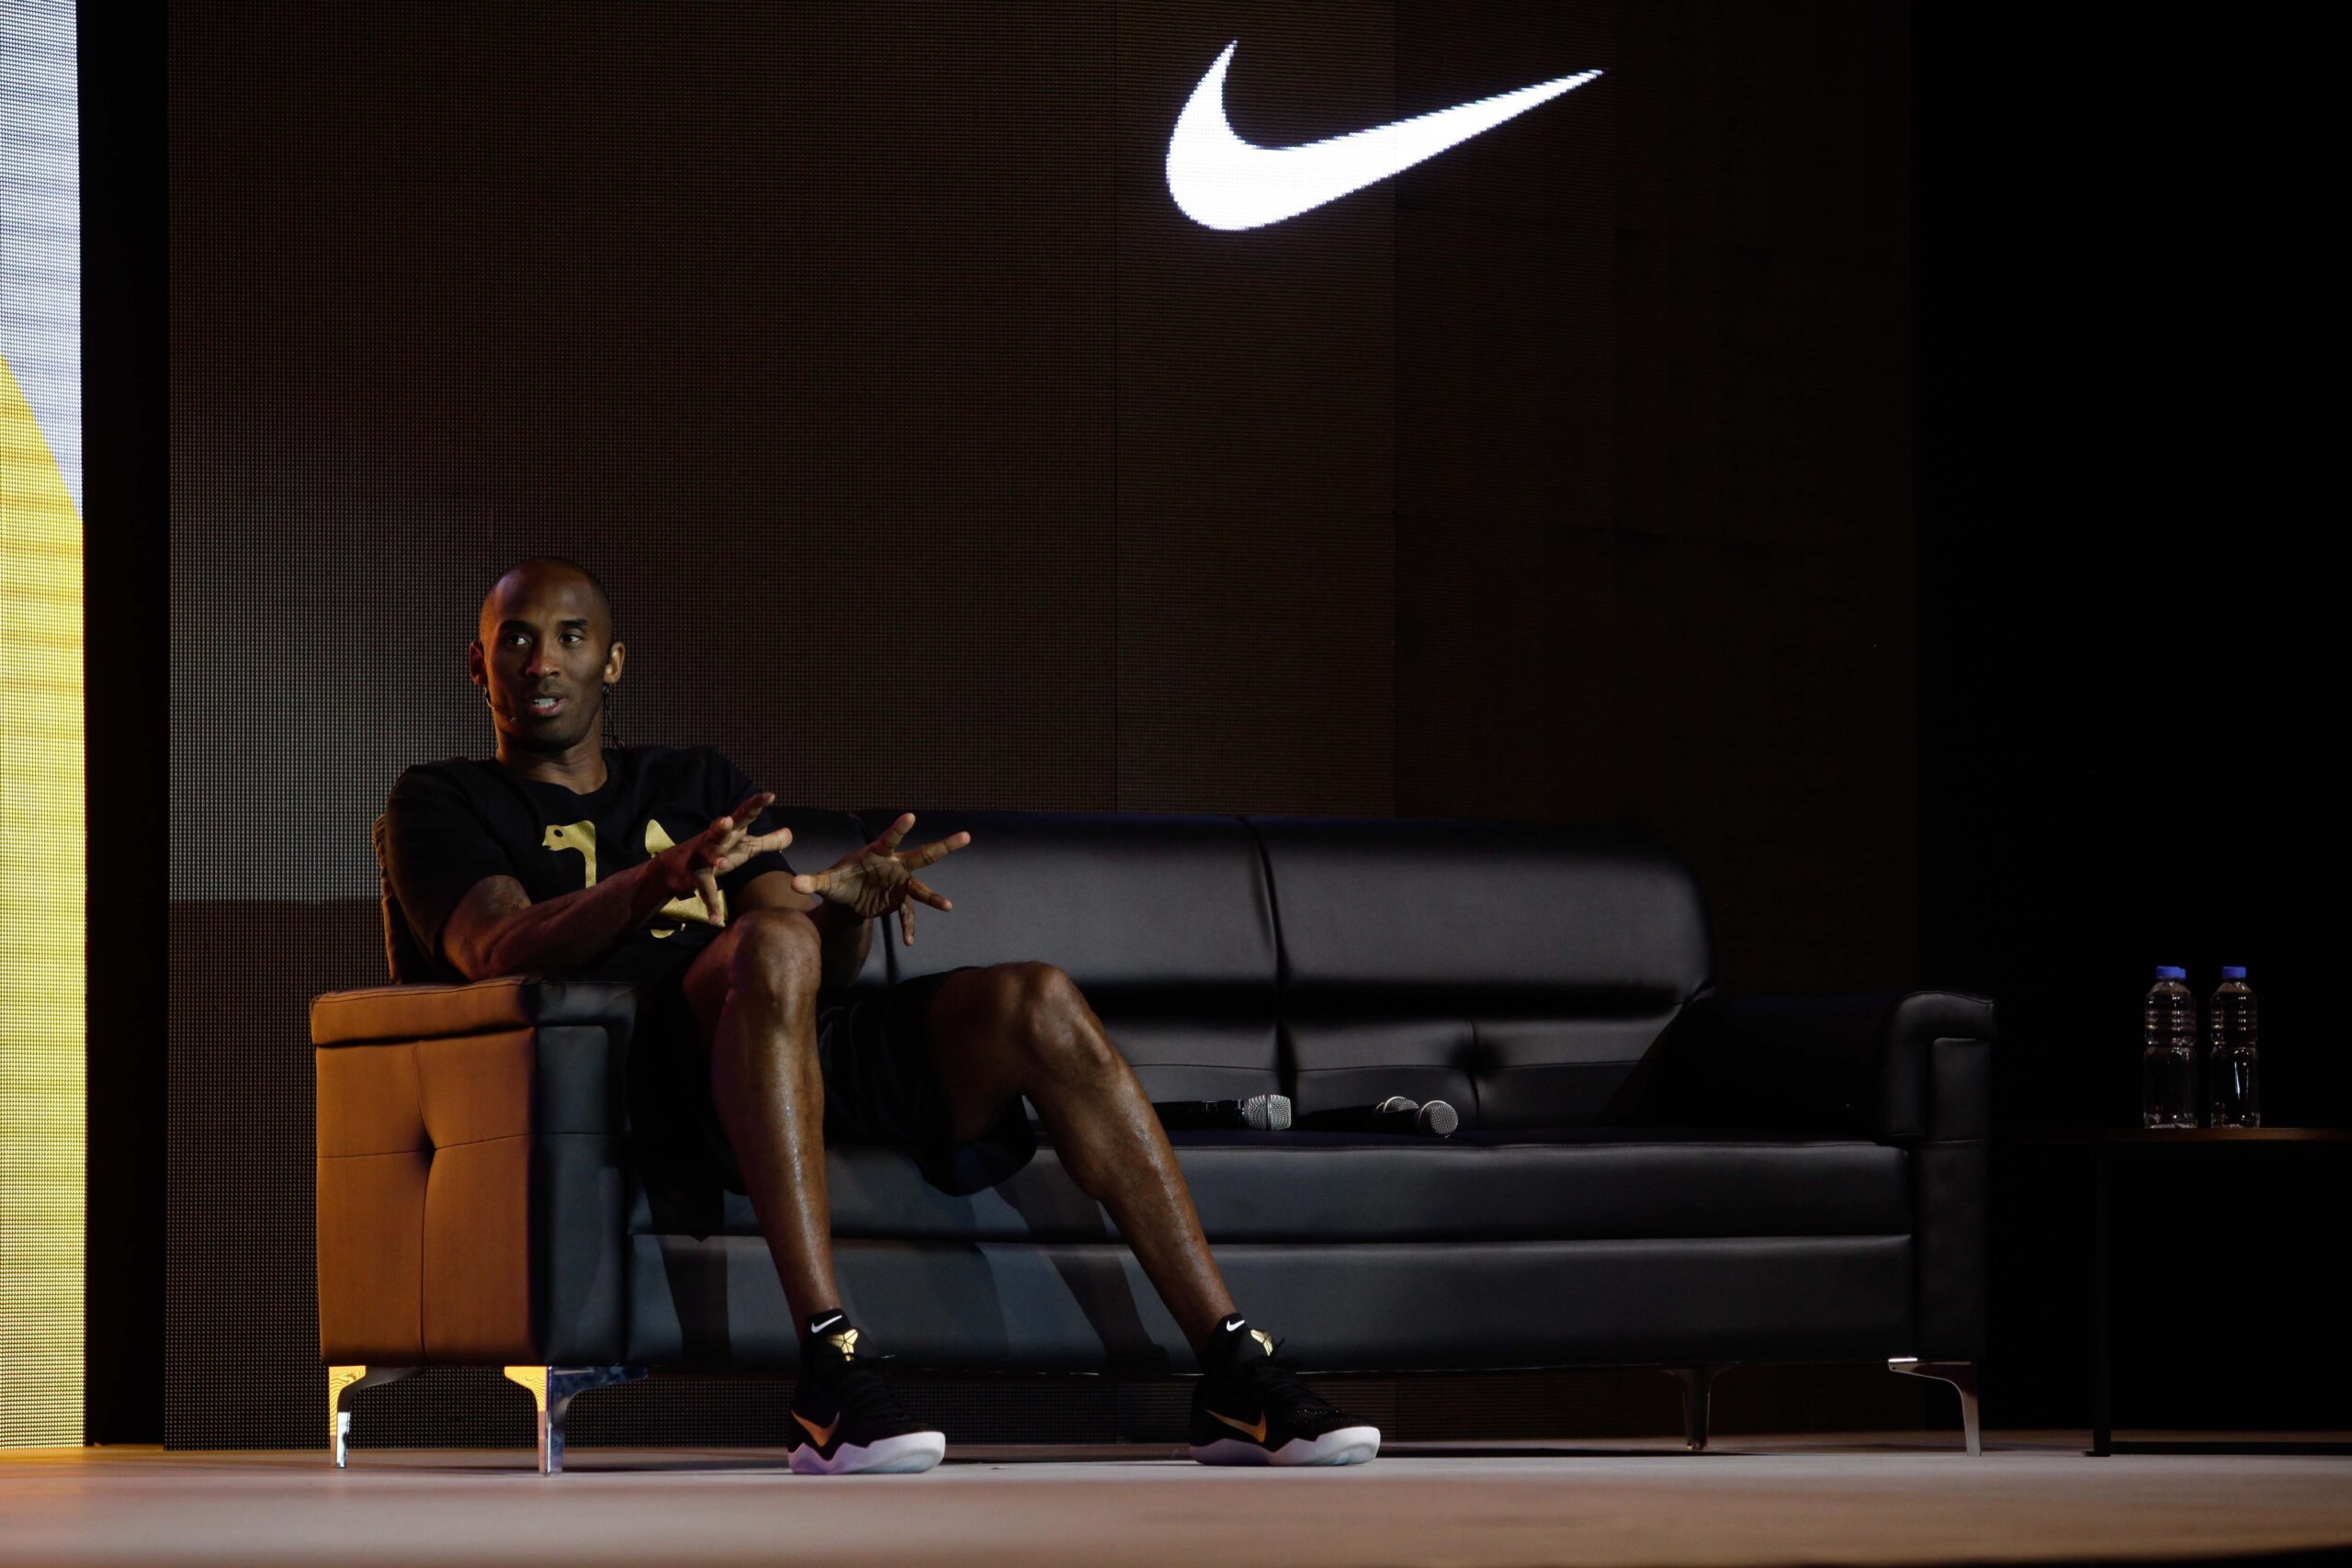 Why Kobe Bryant is comfortable letting basketball go